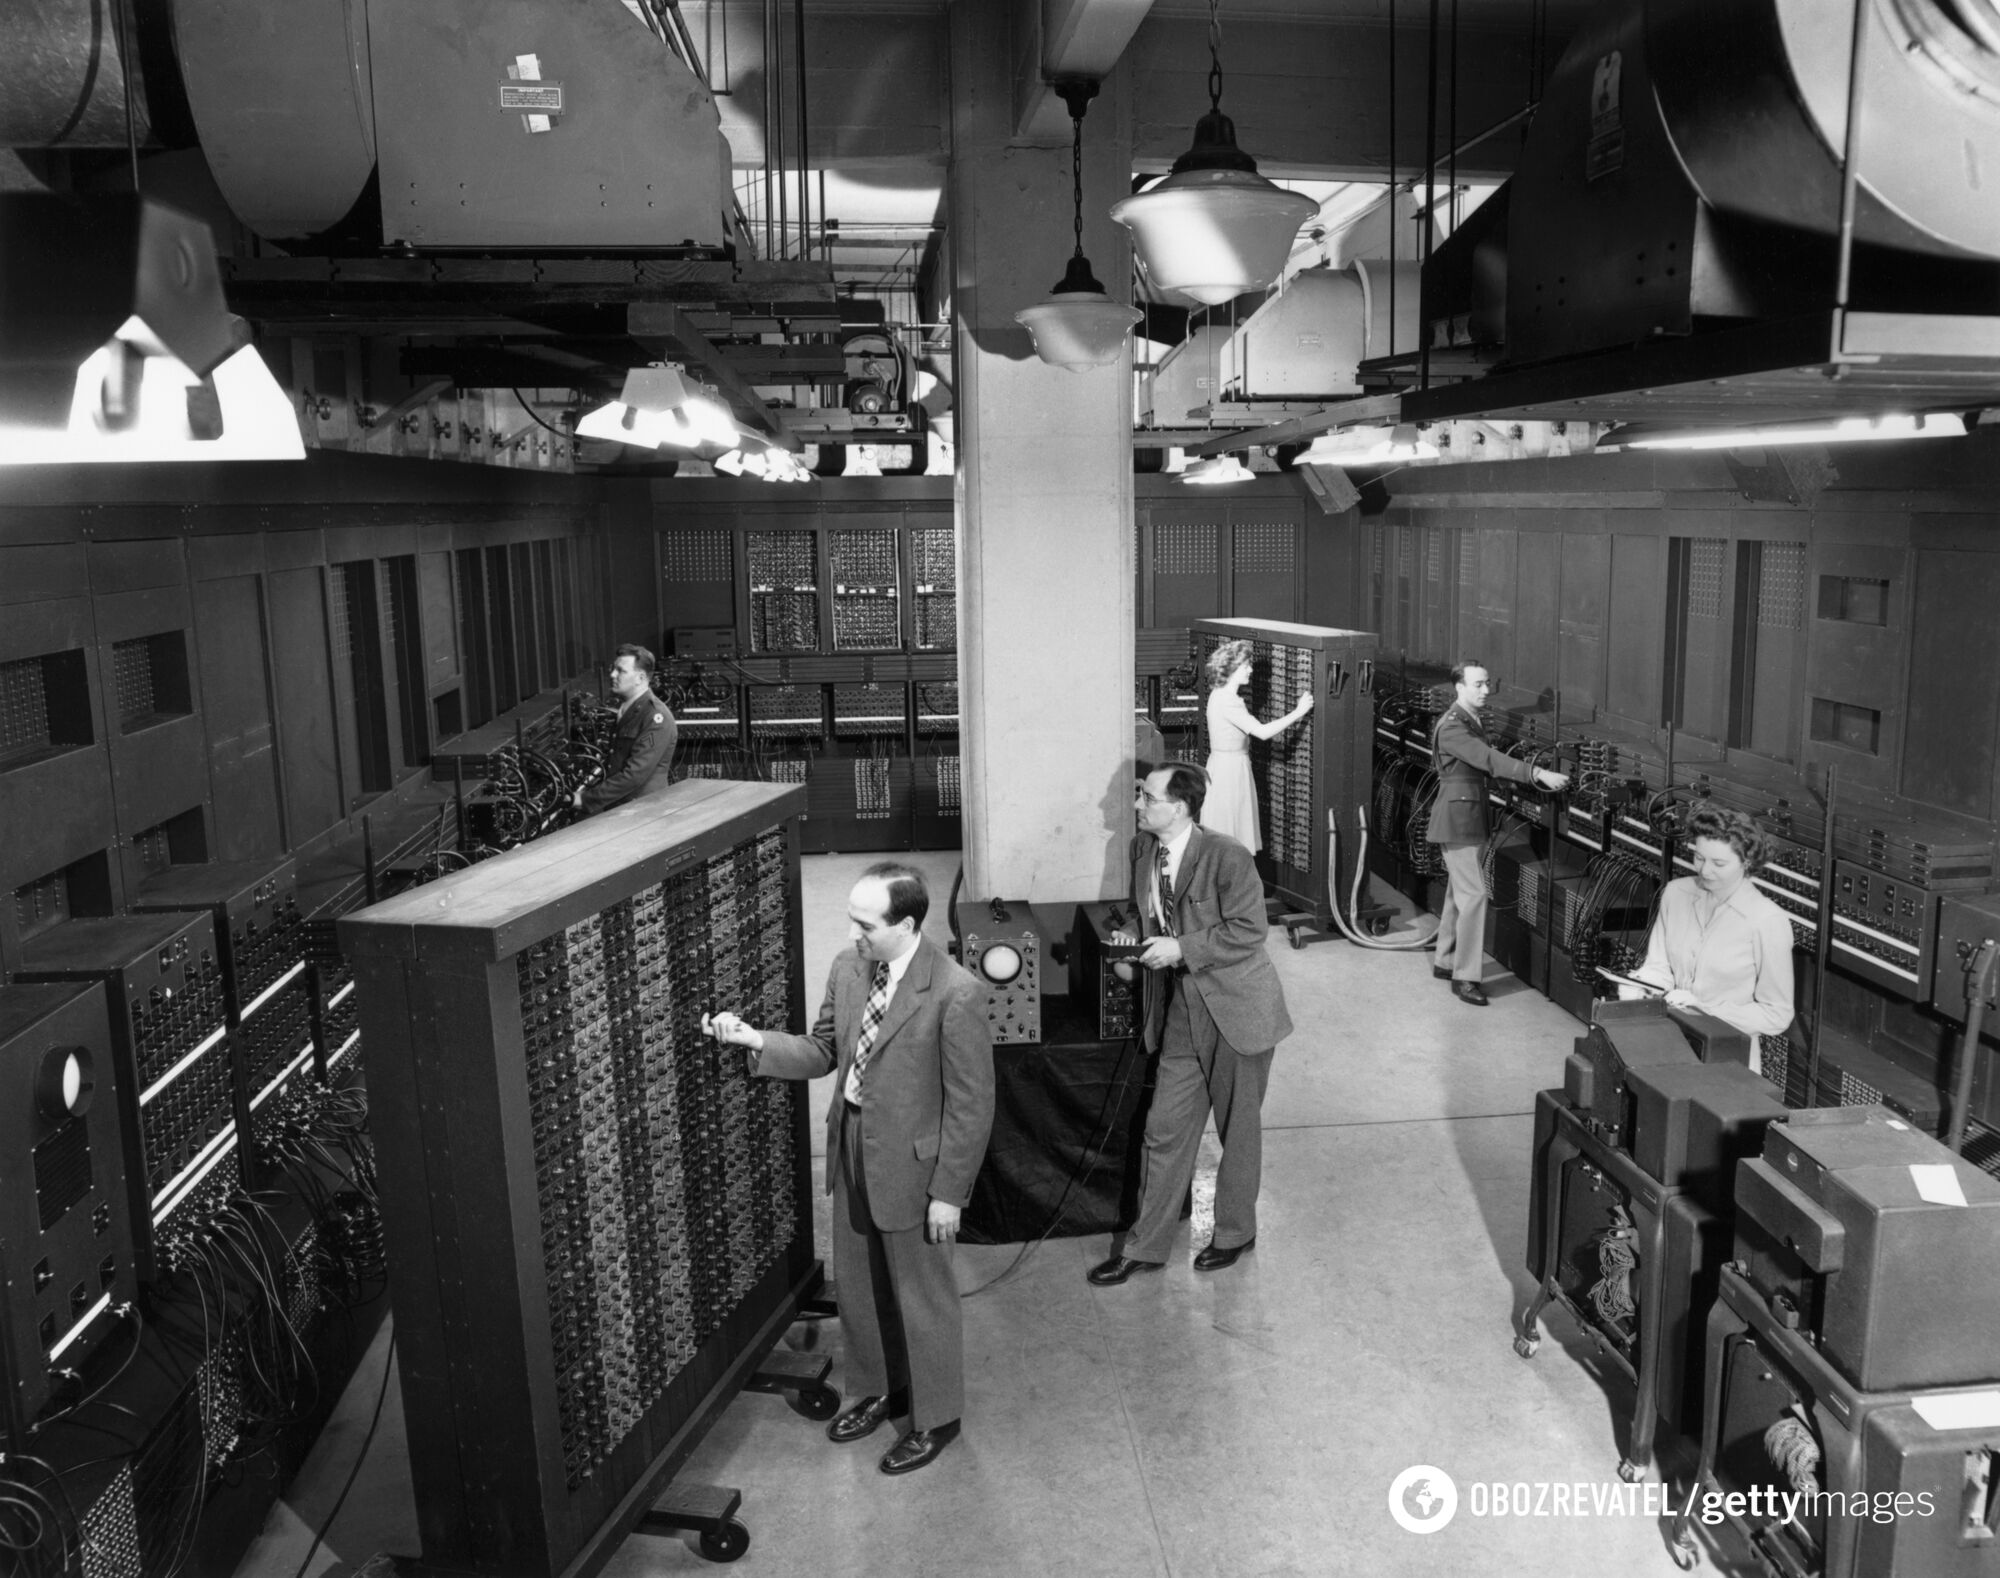 ENIAC weighed about 50 tonnes.